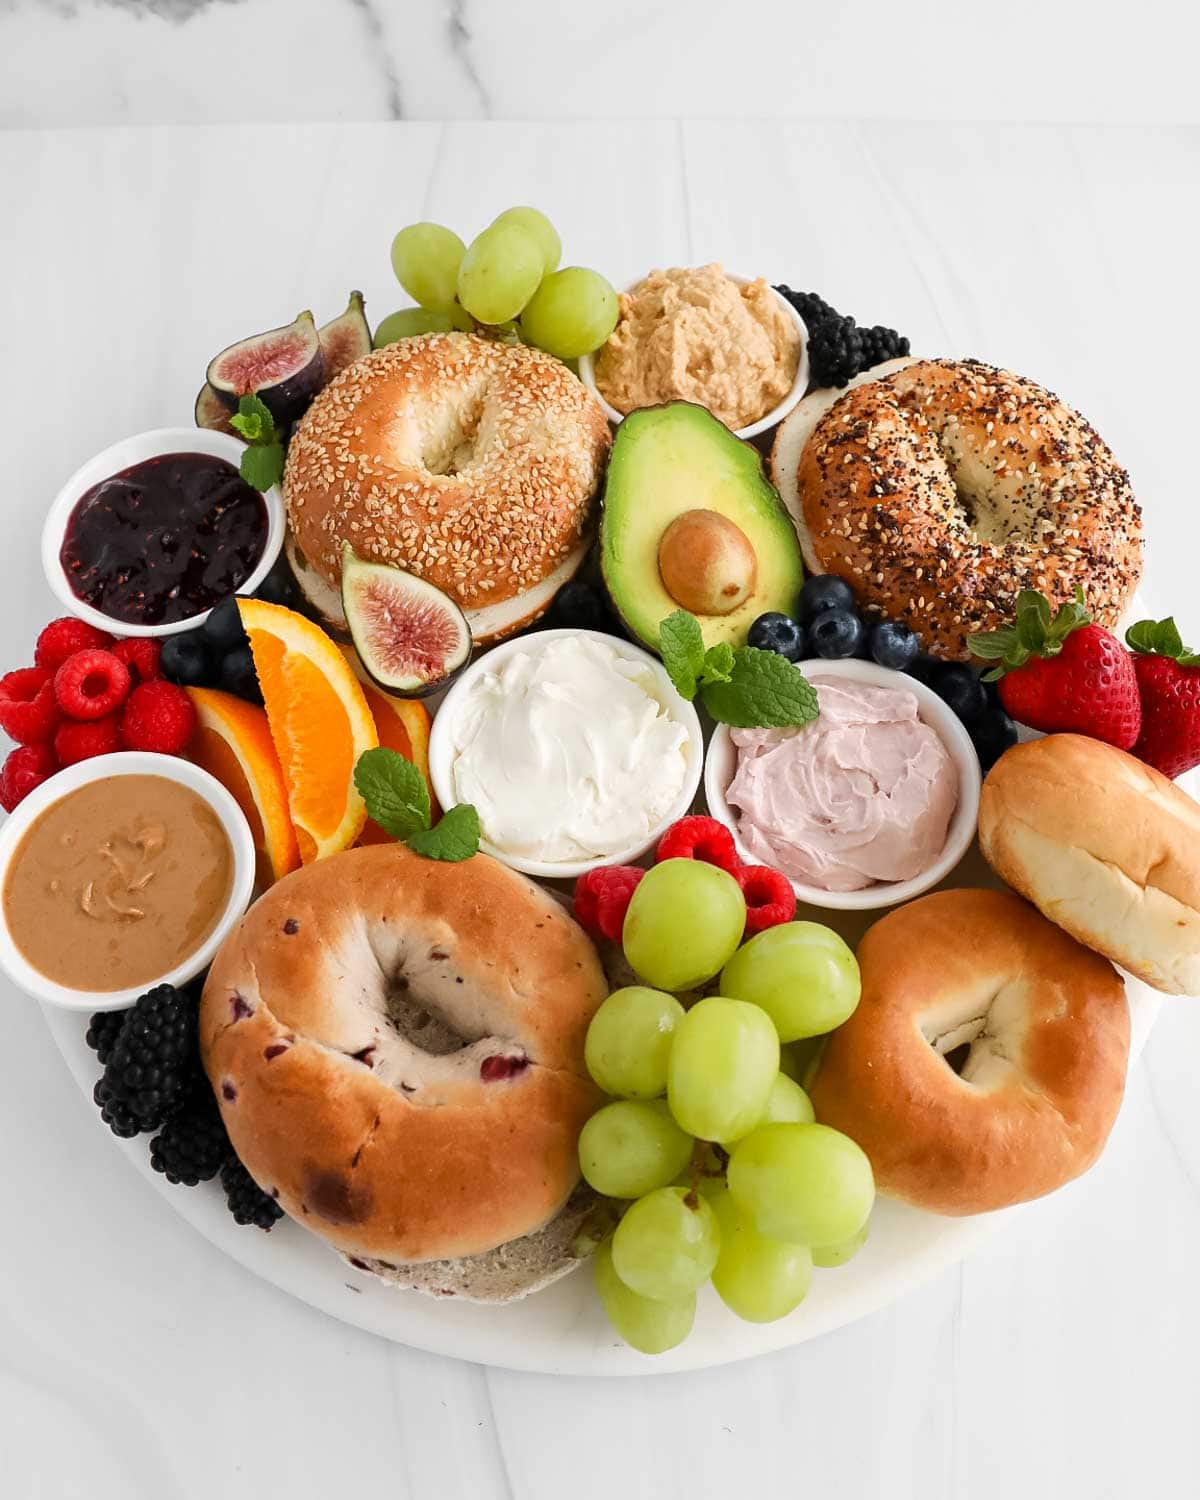 A round marble board filled with bagels, avocado, grapes, strawberries, raspberries, blueberries, blackberries, oranges, figs, mint, peanut butter, jelly, whipped cream, and creamy cheese.